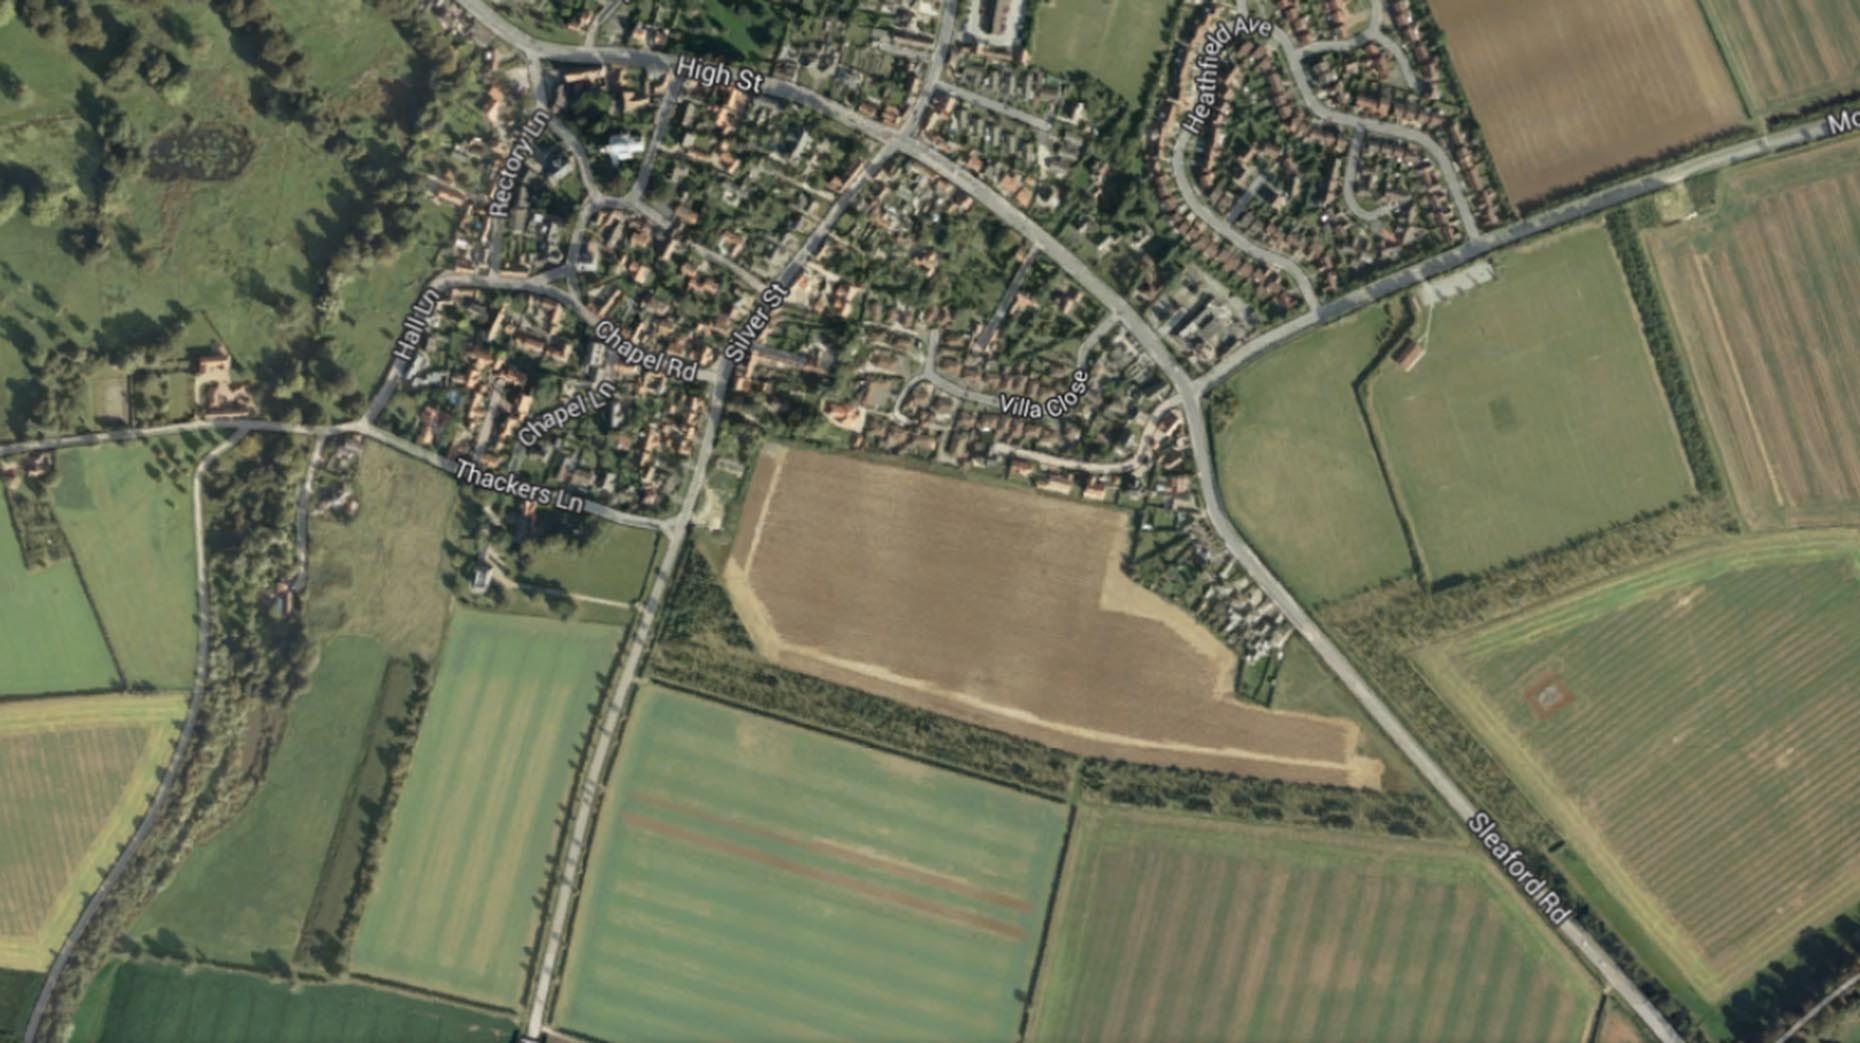 The Branston residential development plan is proposed for land east of Mere Road and west of Sleaford Road. Photo: Google Maps 